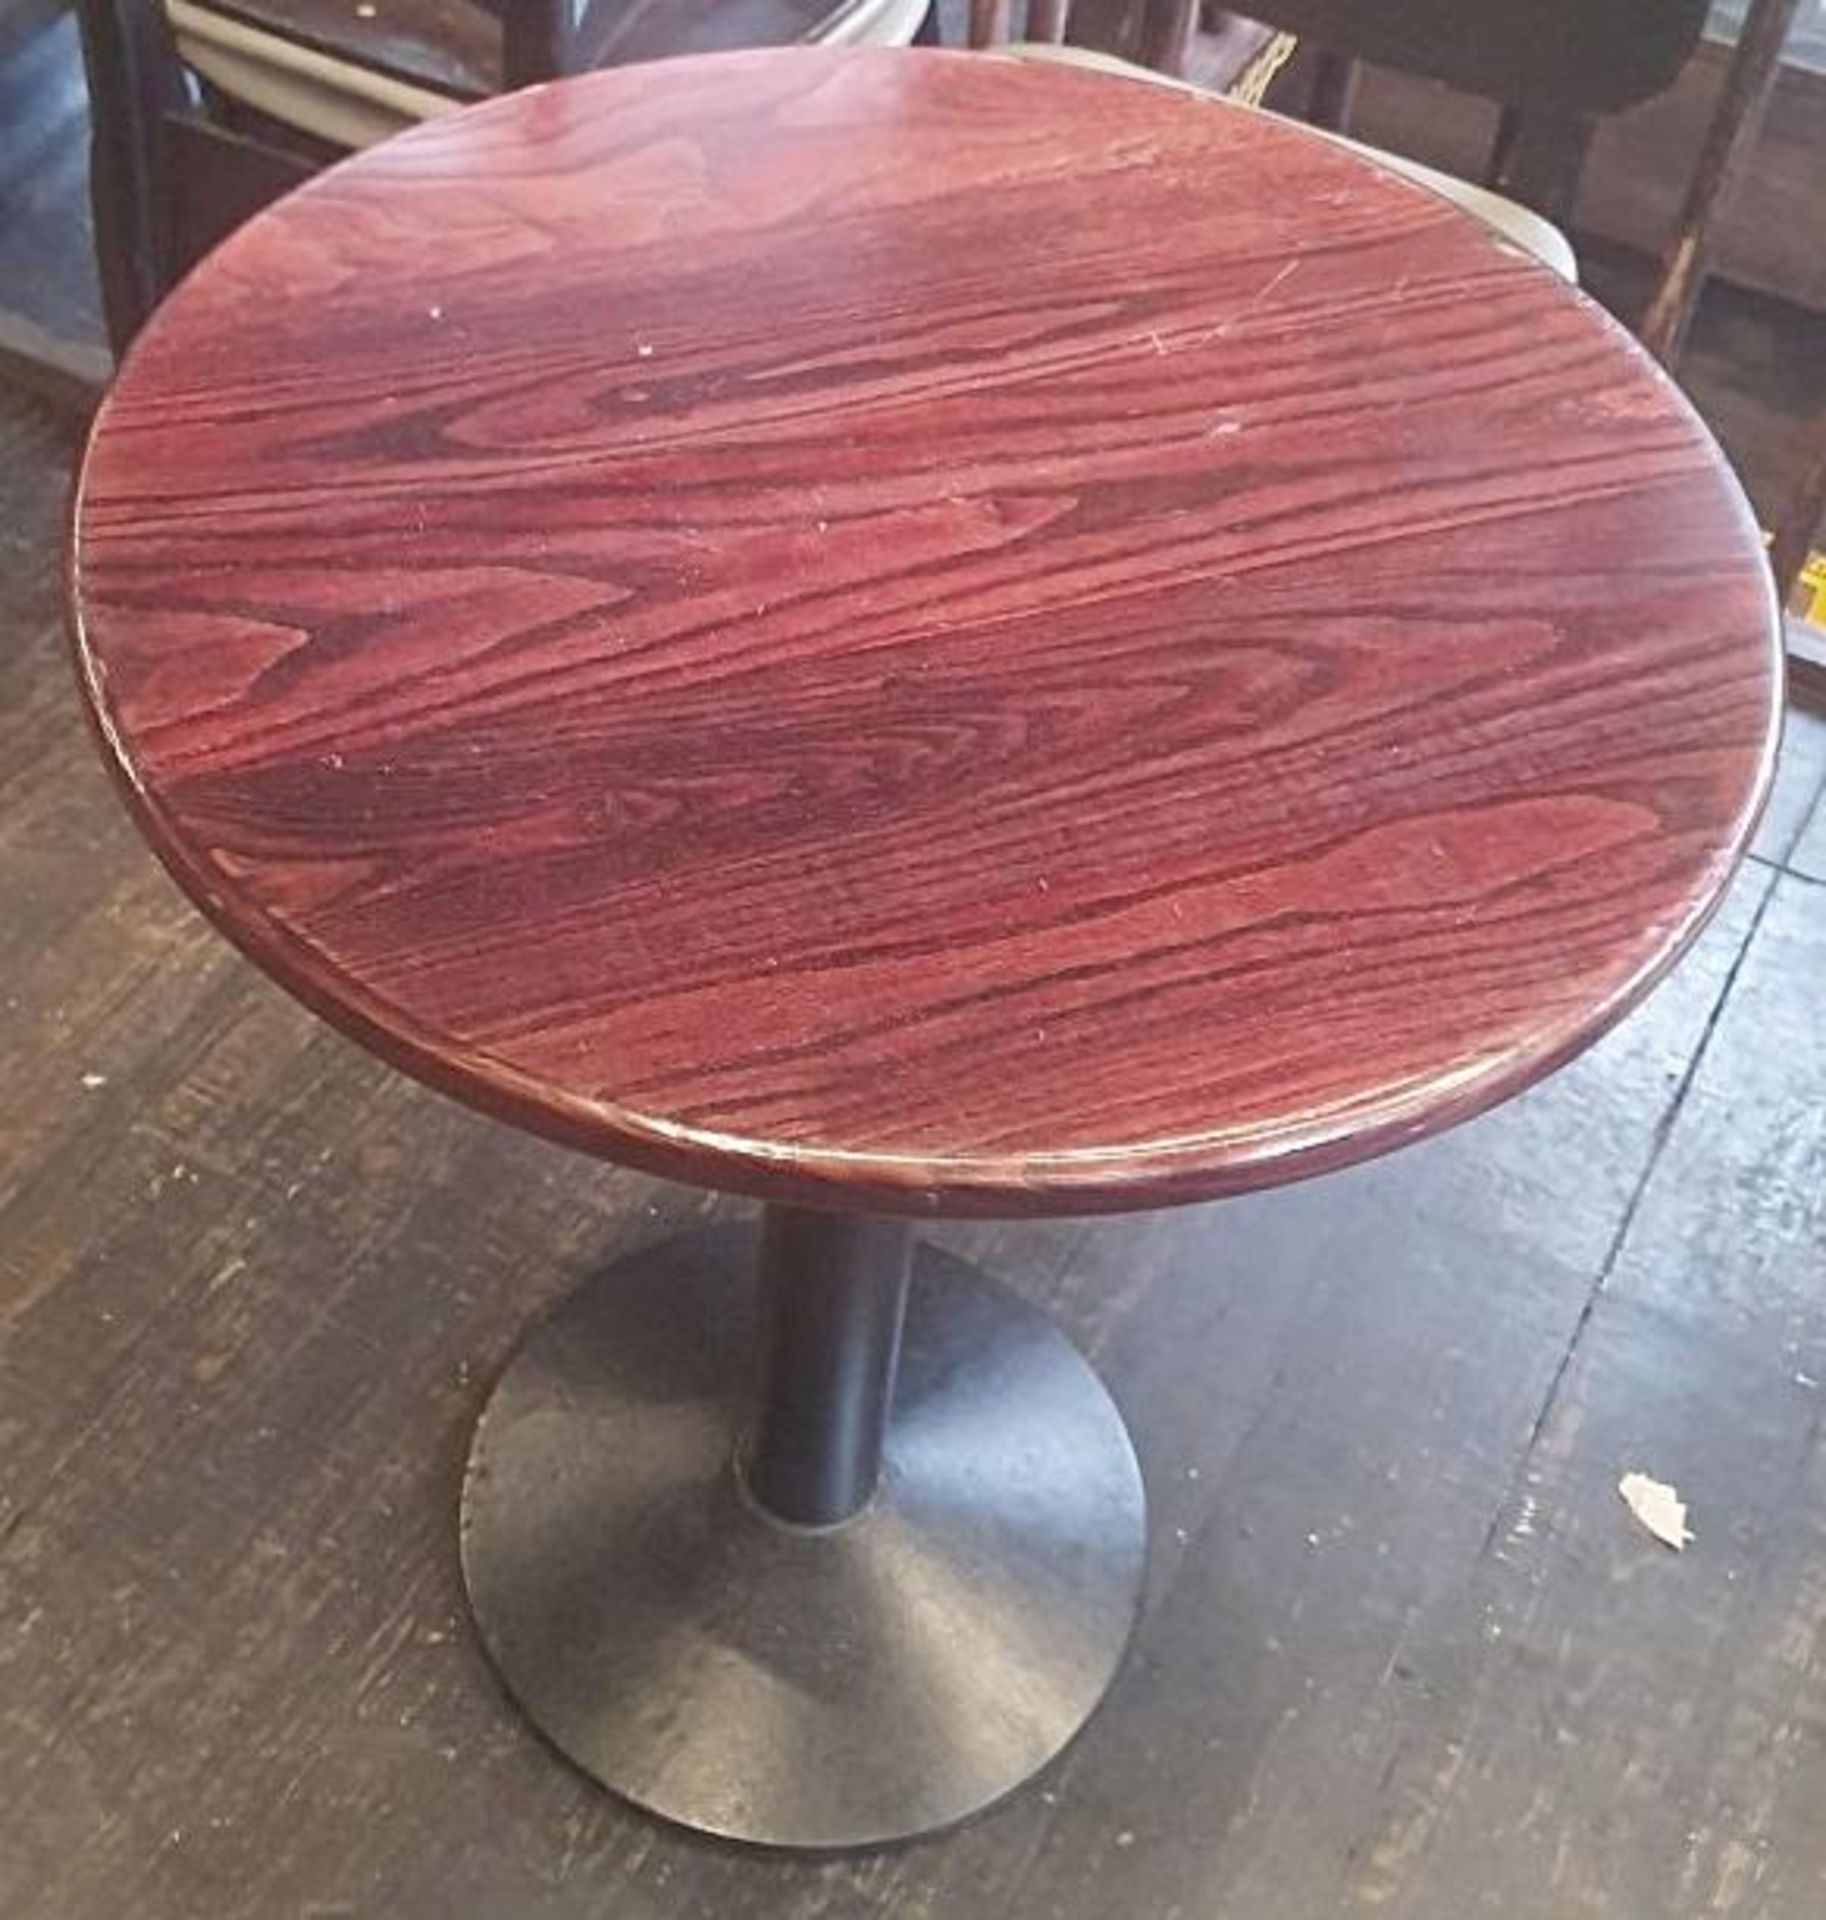 3 x Round Bistro Tables With Cherry Wood Tops - Dimensions: Diameter 61cm, Height 77cm - Recently Ta - Image 3 of 3